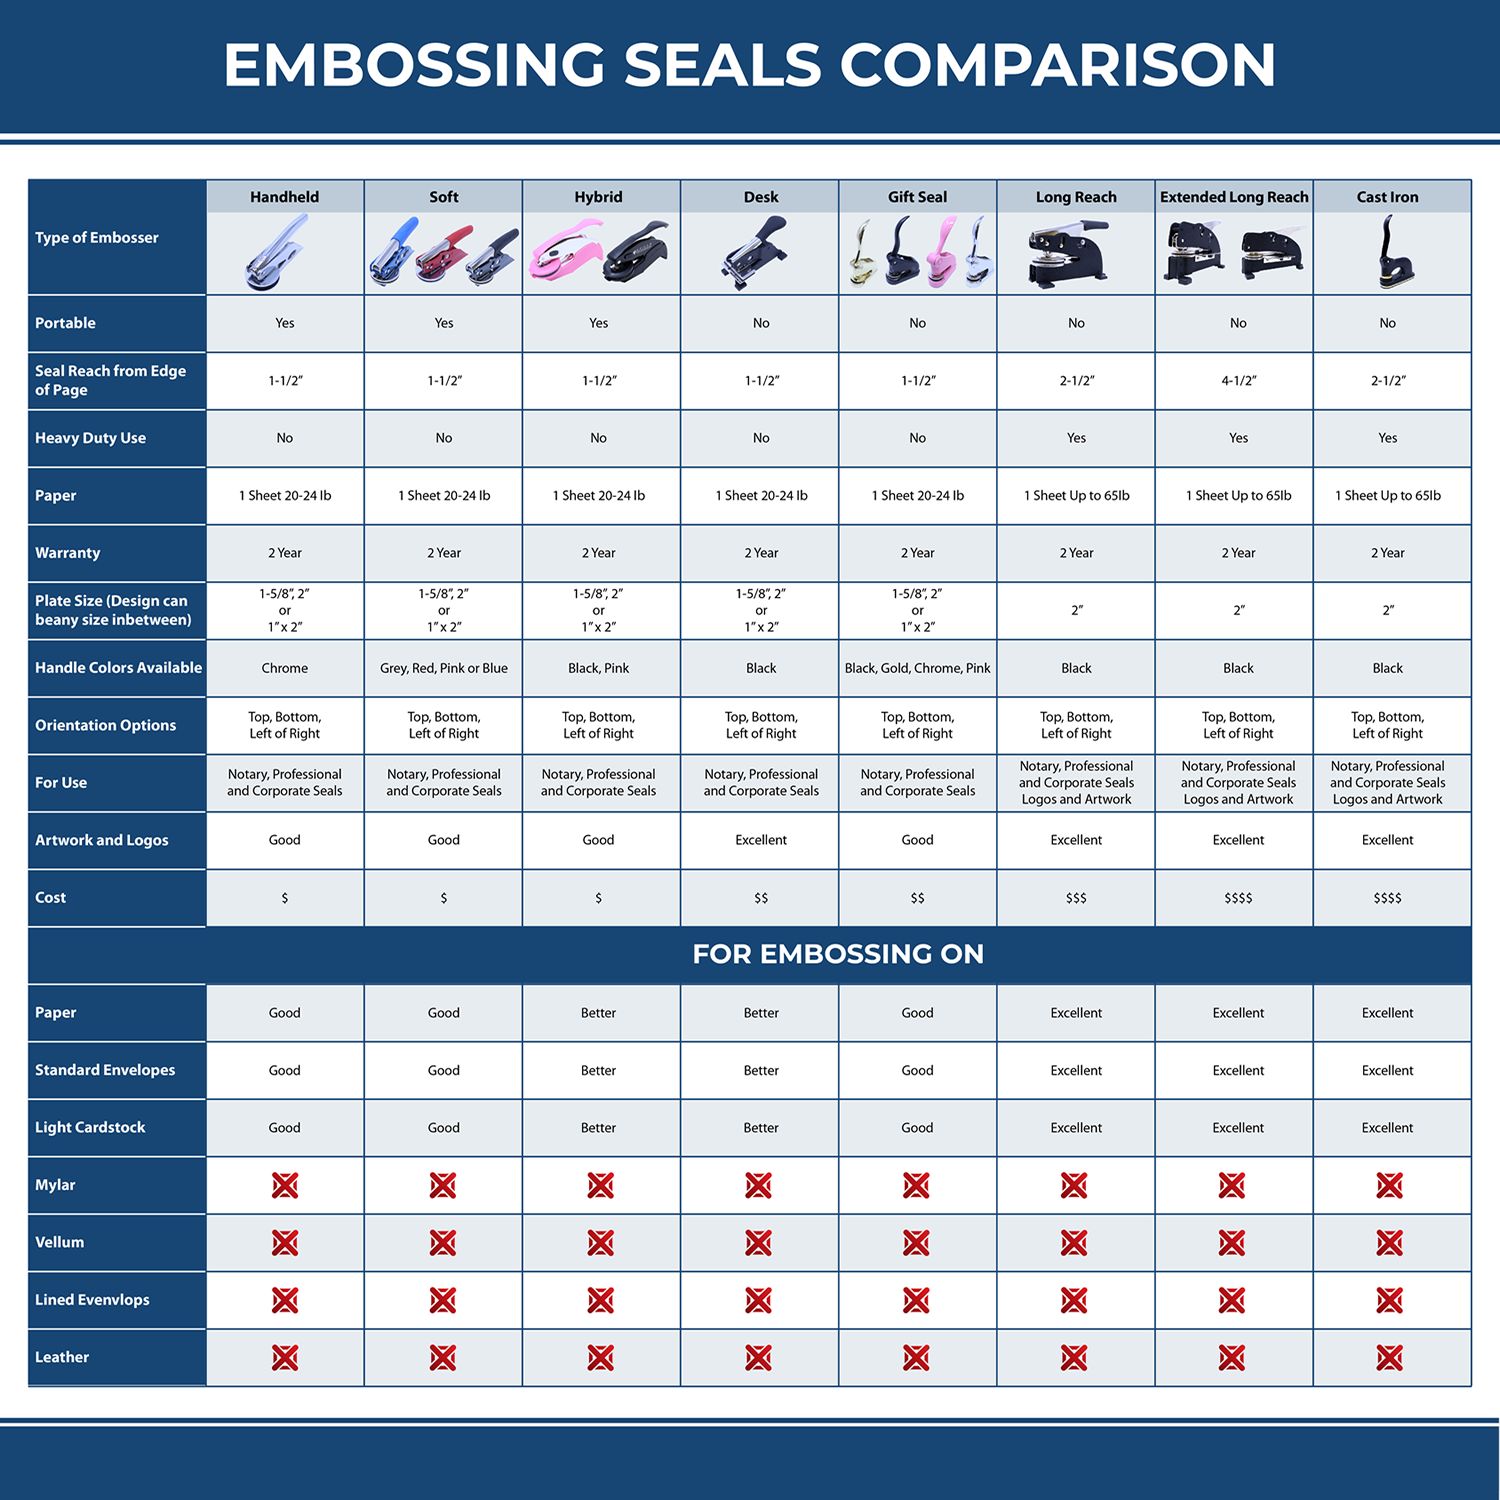 A comparison chart for the different types of mount models available for the Kentucky Desk Landscape Architectural Seal Embosser.